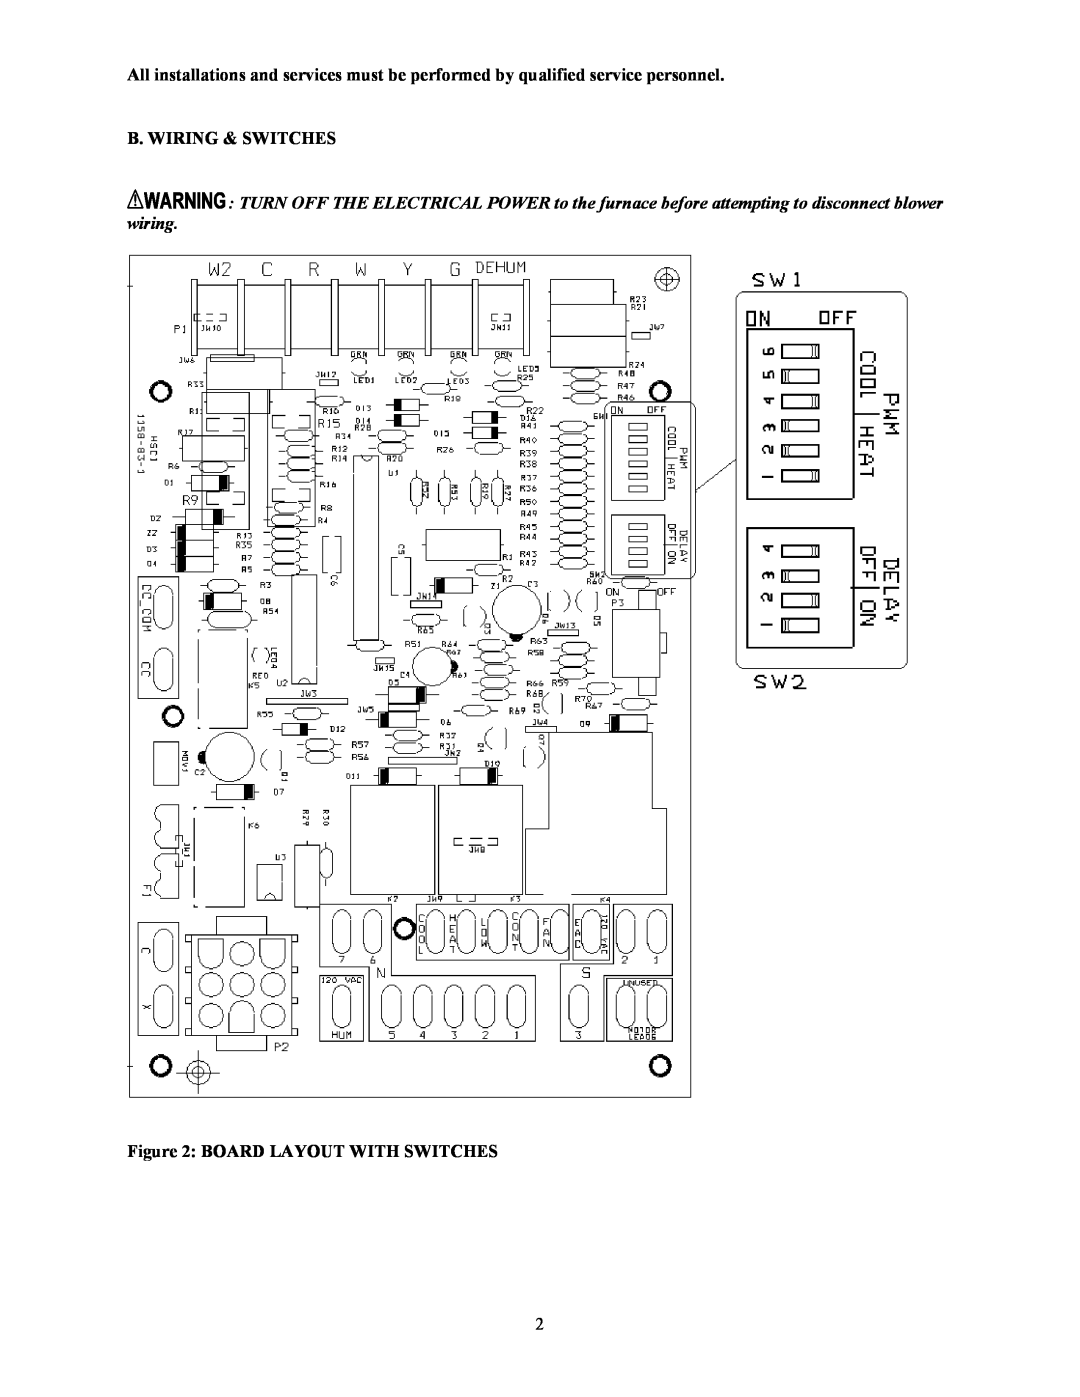 Crown CSHB60-90XE operation manual B. Wiring & Switches, Board Layout With Switches 